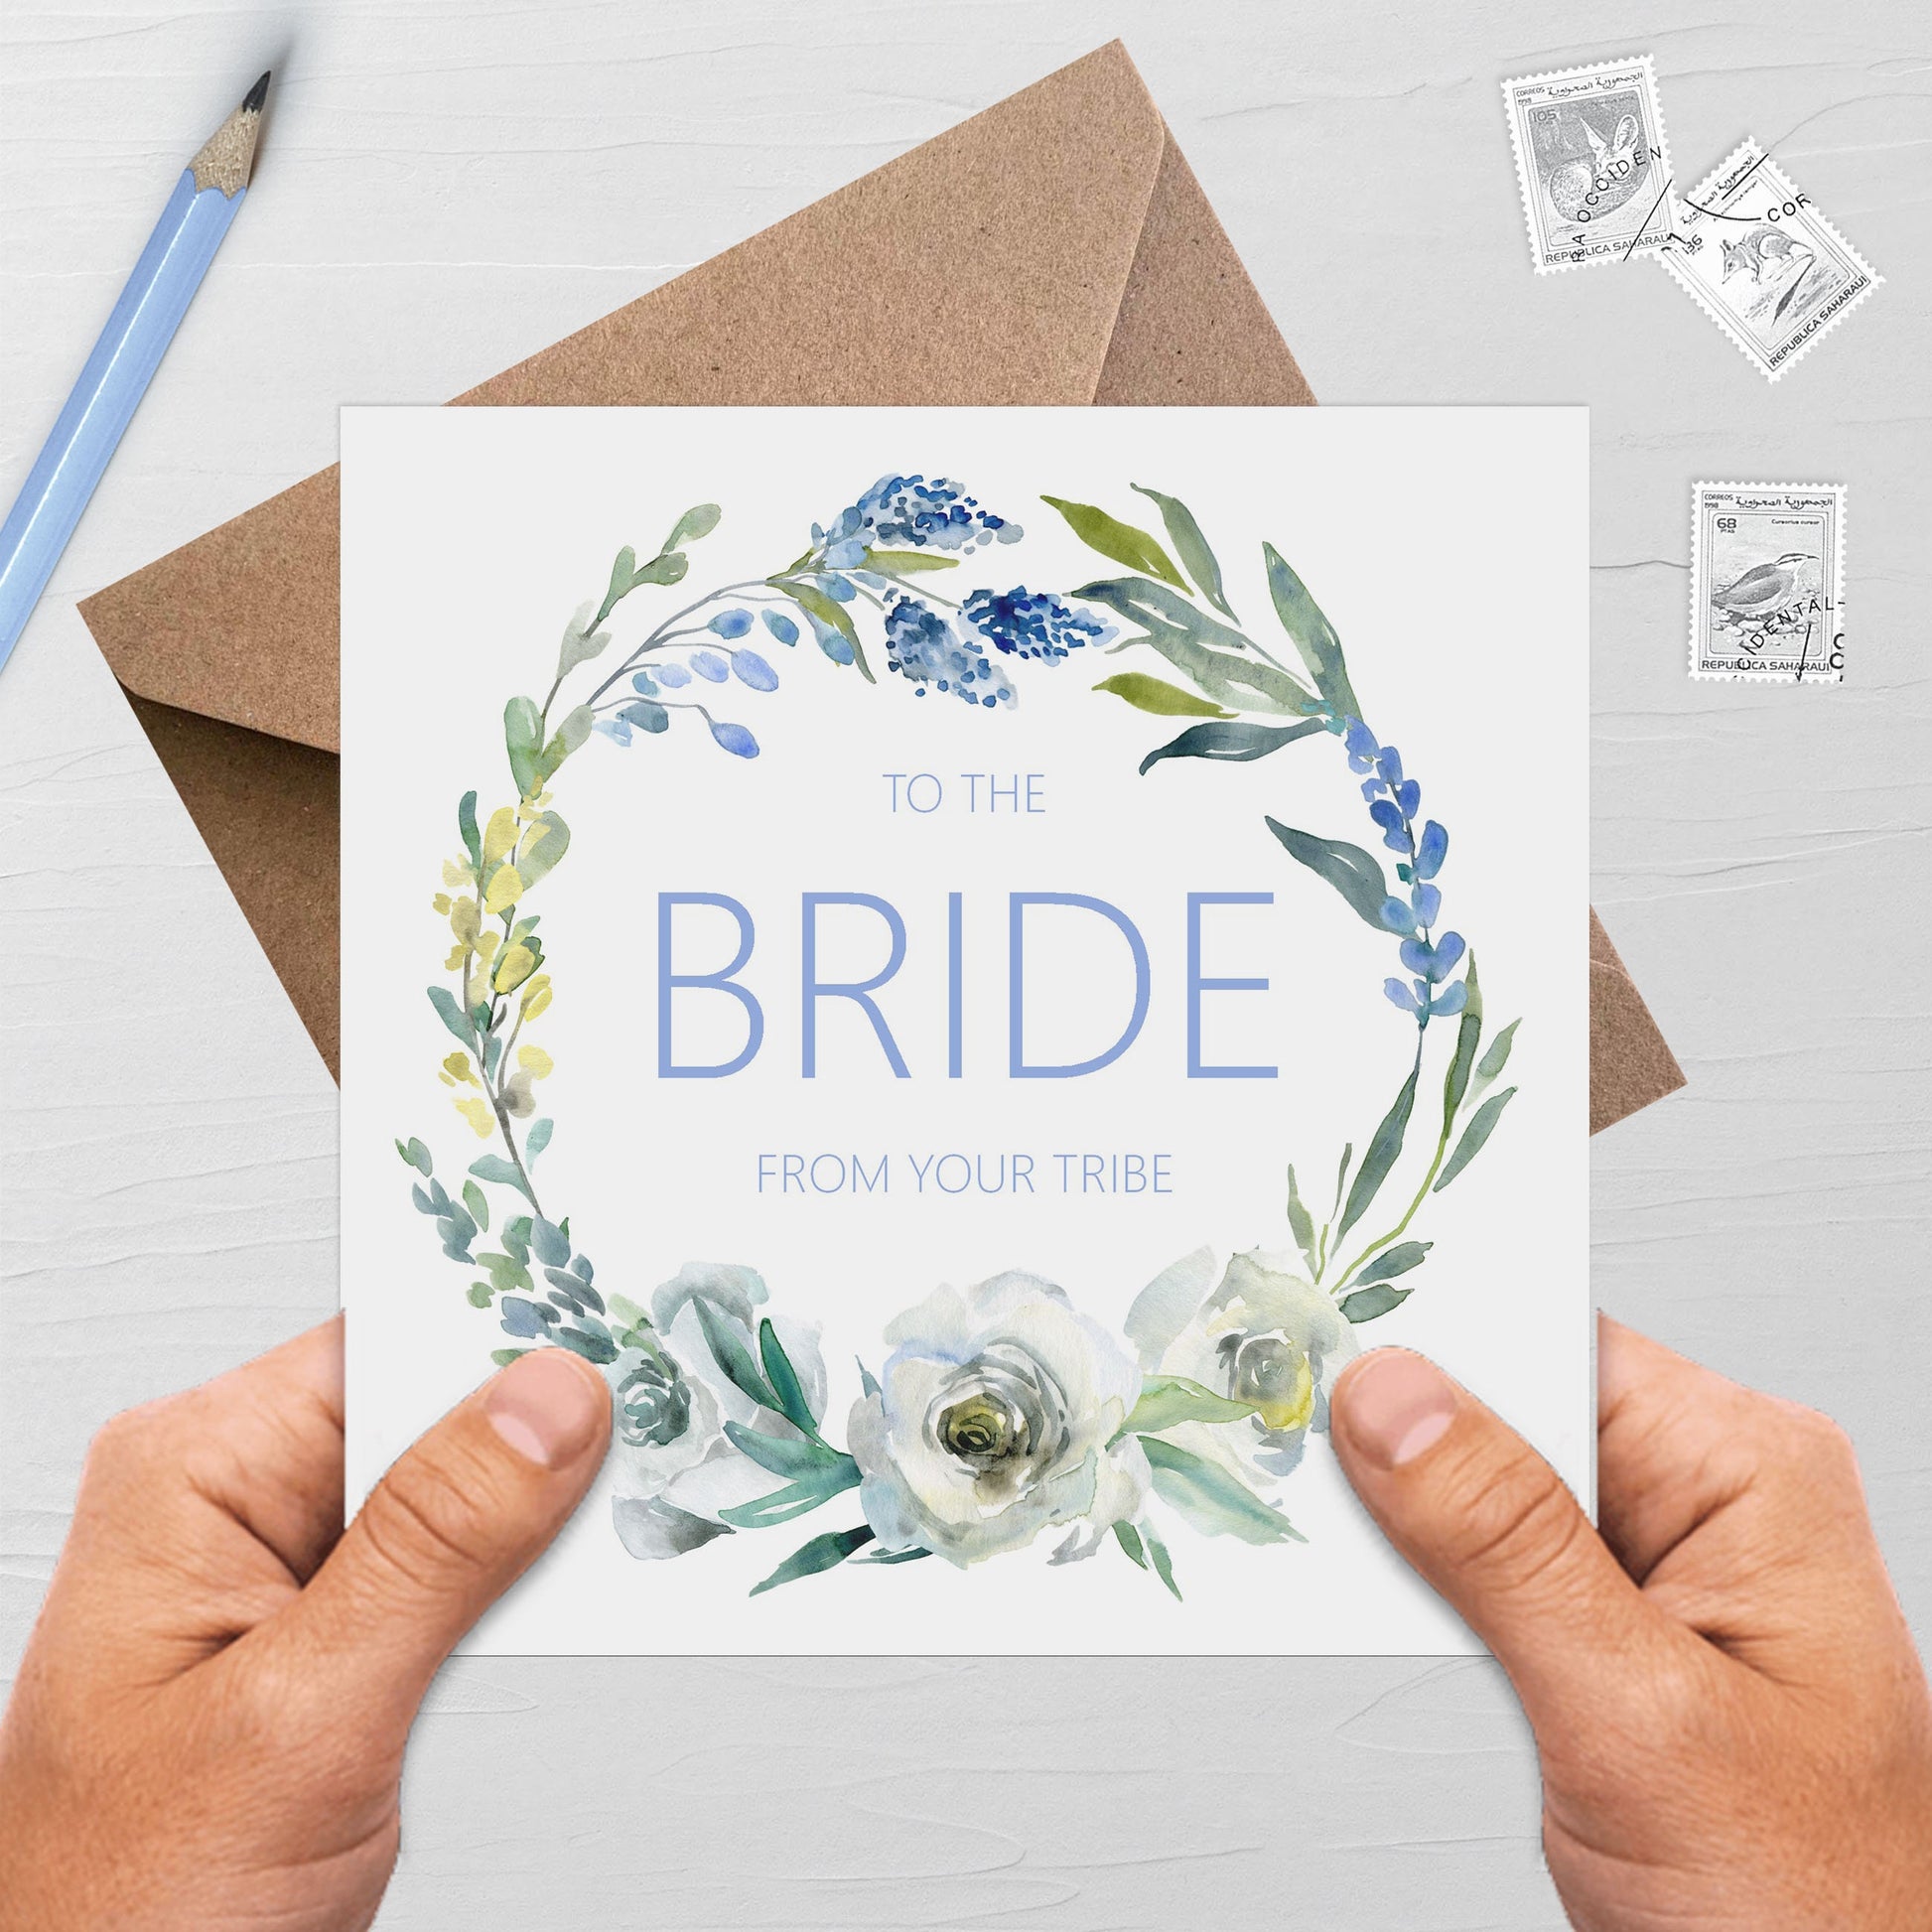 Bride From Your Tribe Wedding Card - Blue Floral